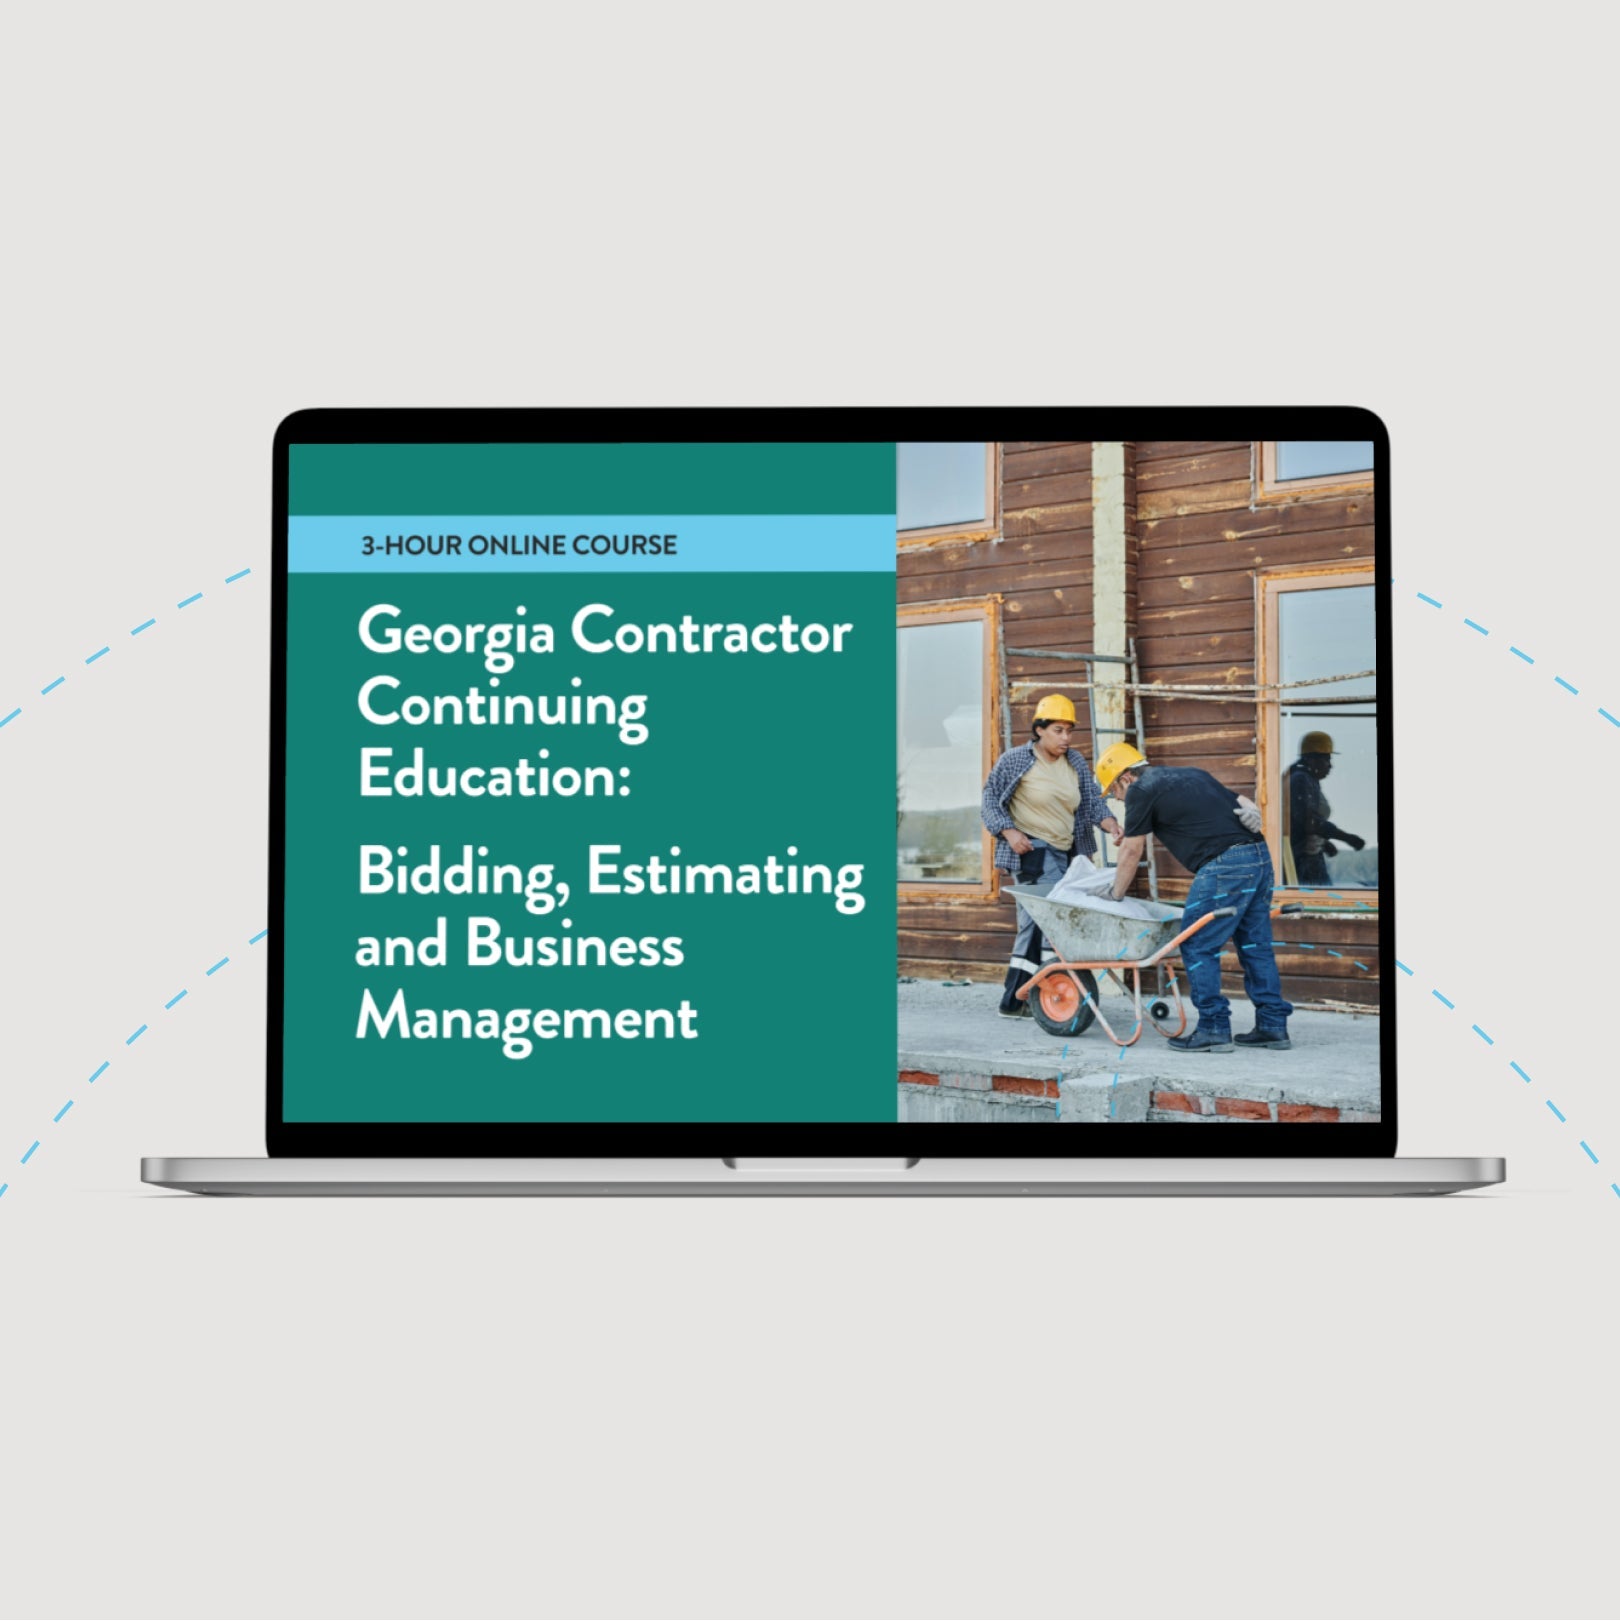 Georgia Contractor Continuing Education: Bidding, Estimating and Business Management - 3-Hour Online Course